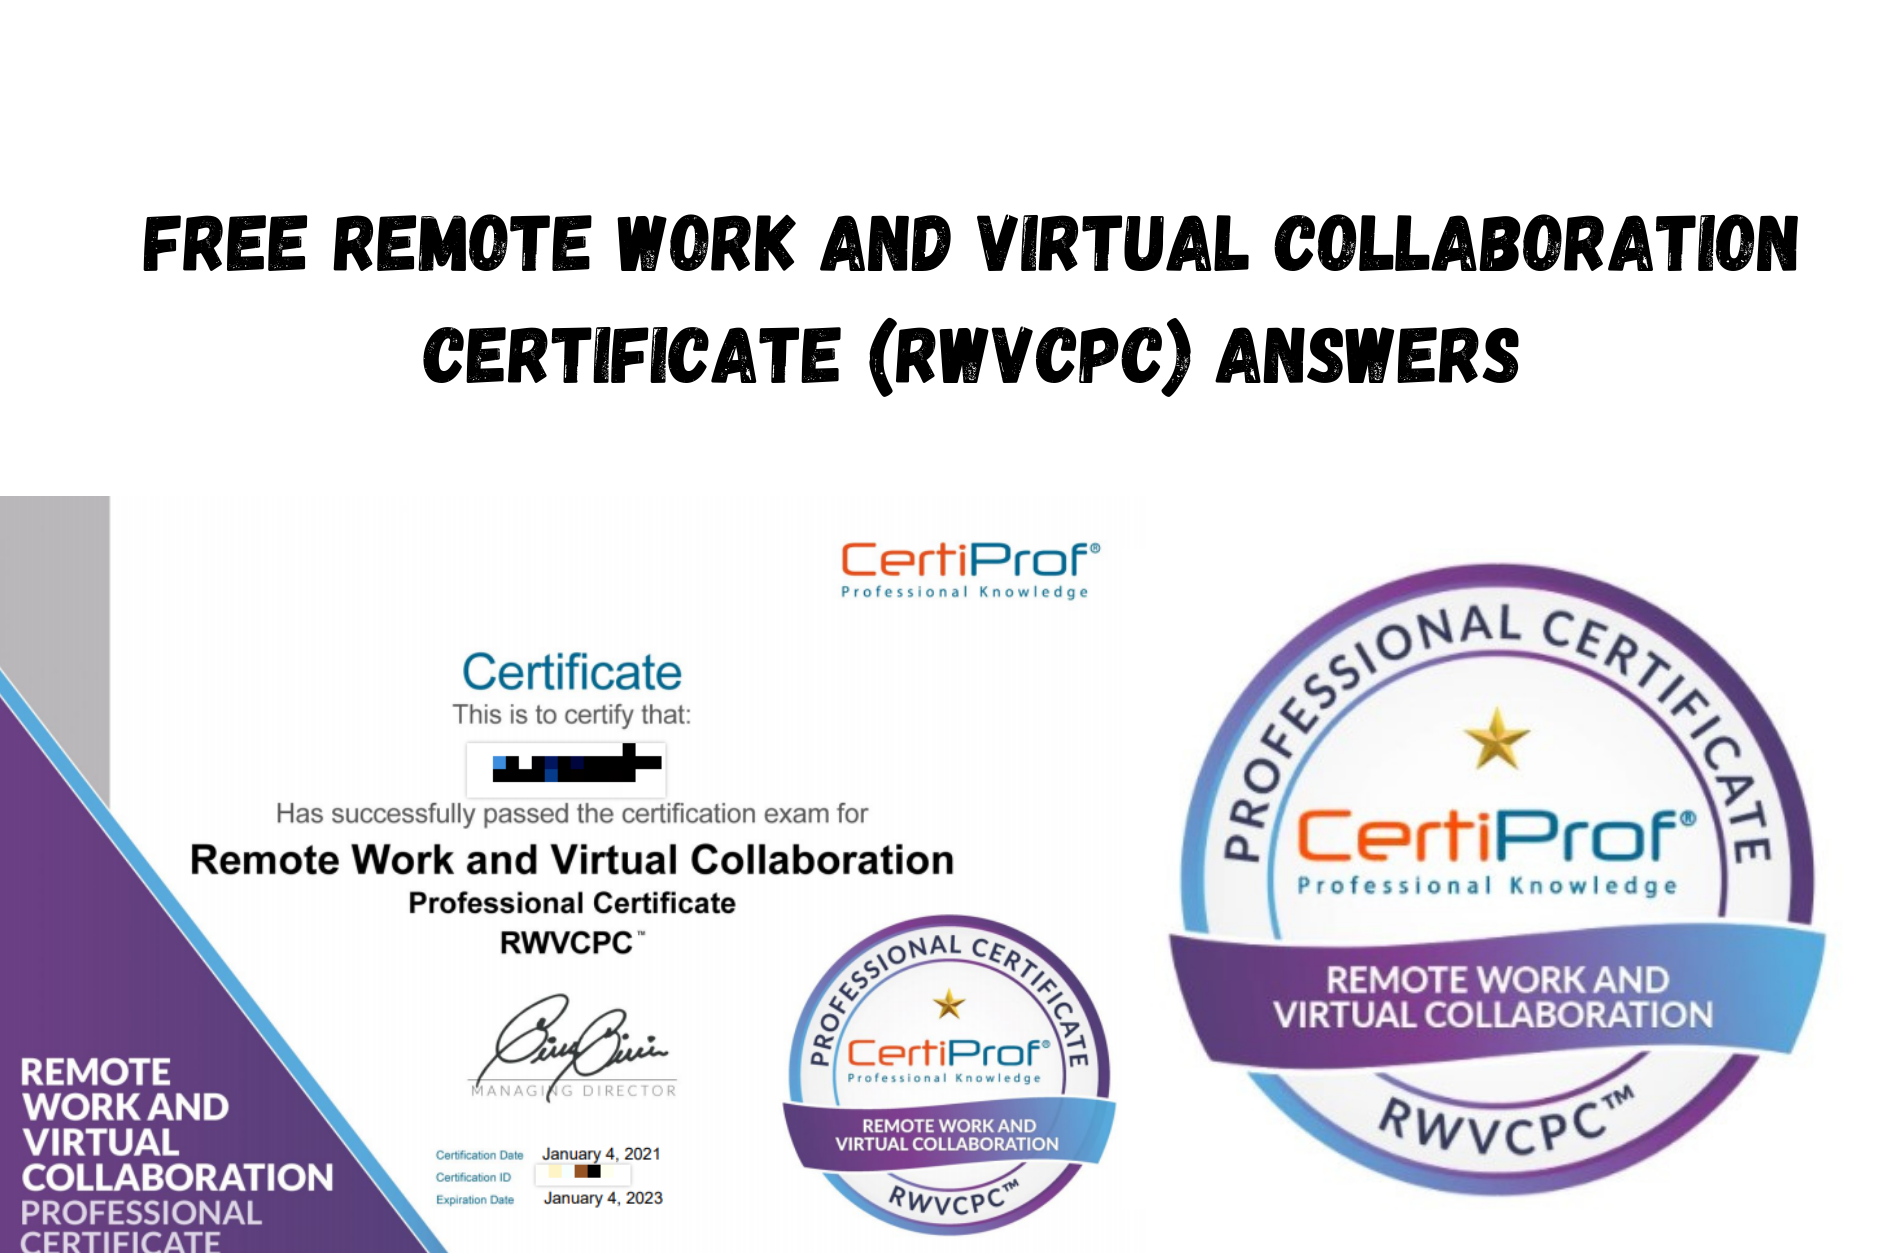 Free Remote Work and Virtual Collaboration Certificate (RWVCPC) answers